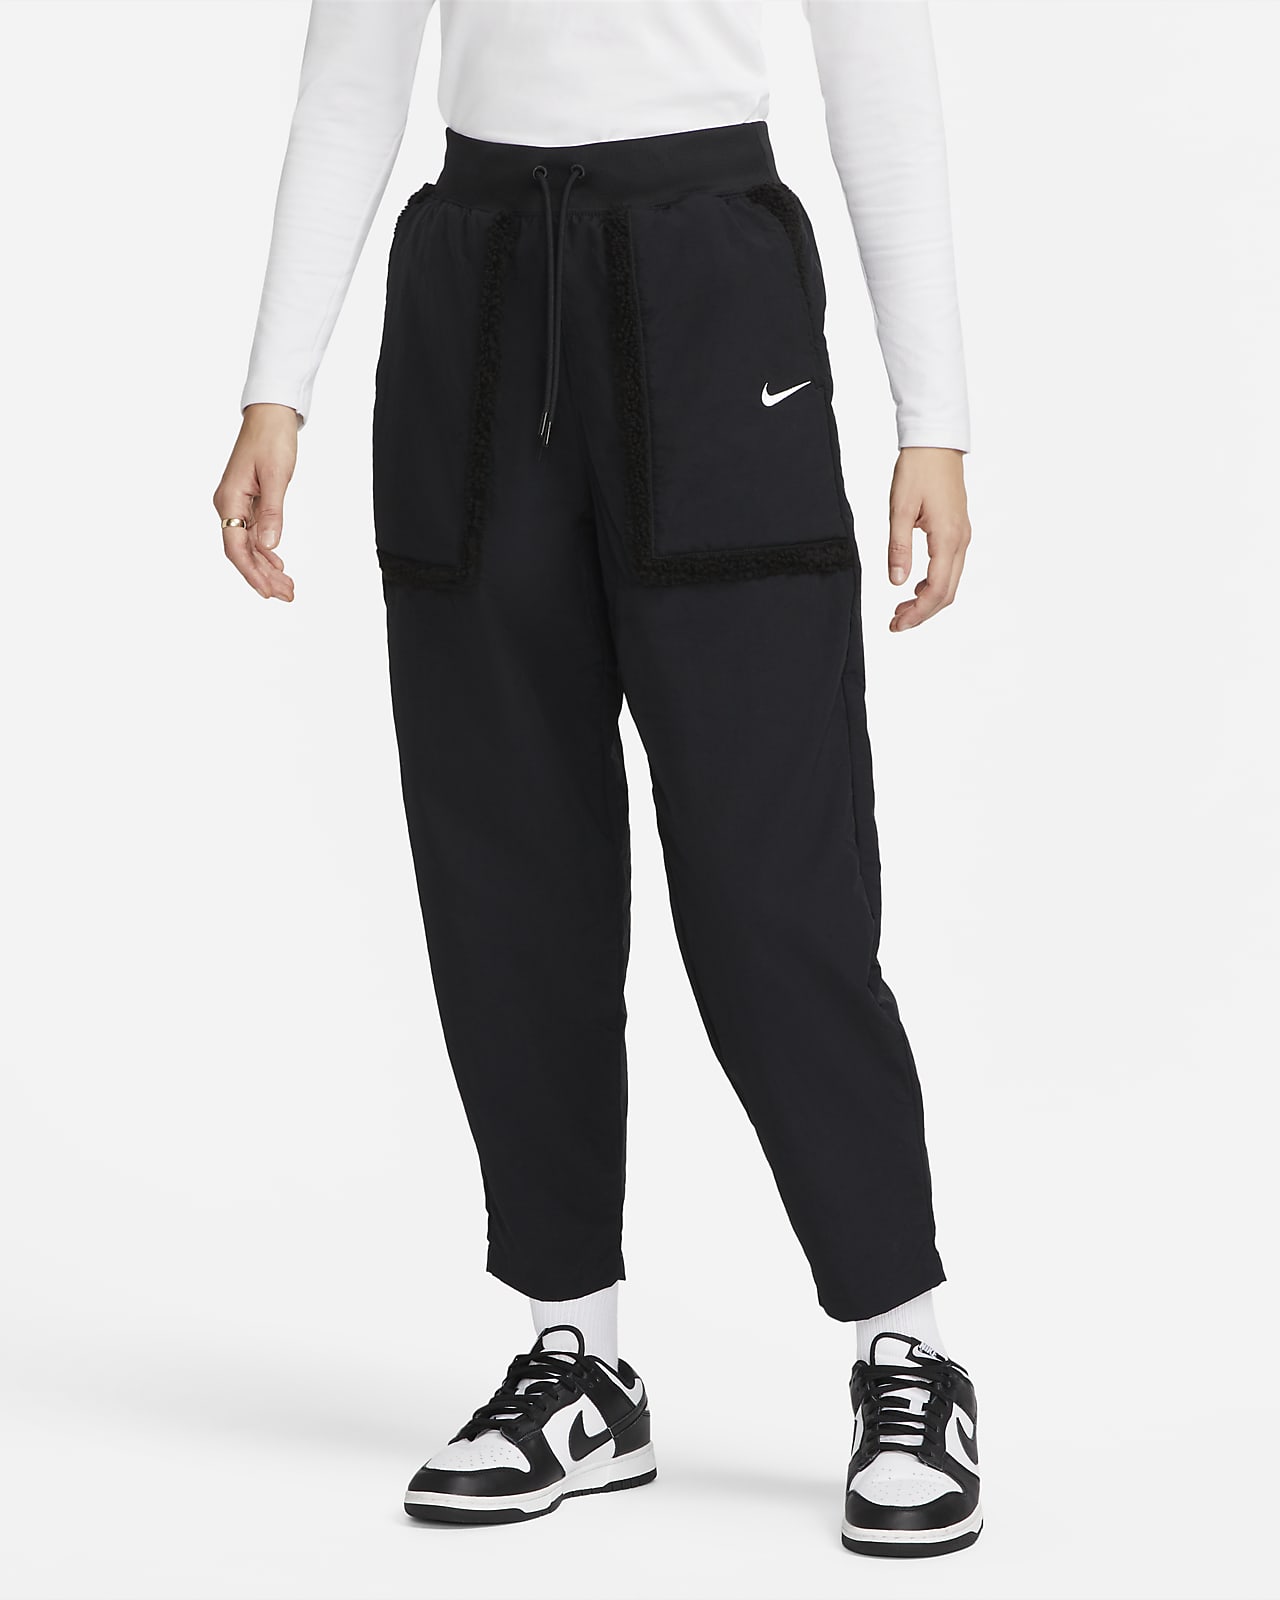 No way Melancholy Significance Nike Sportswear Essential Women's Woven High-Waisted Curve Pants. Nike.com